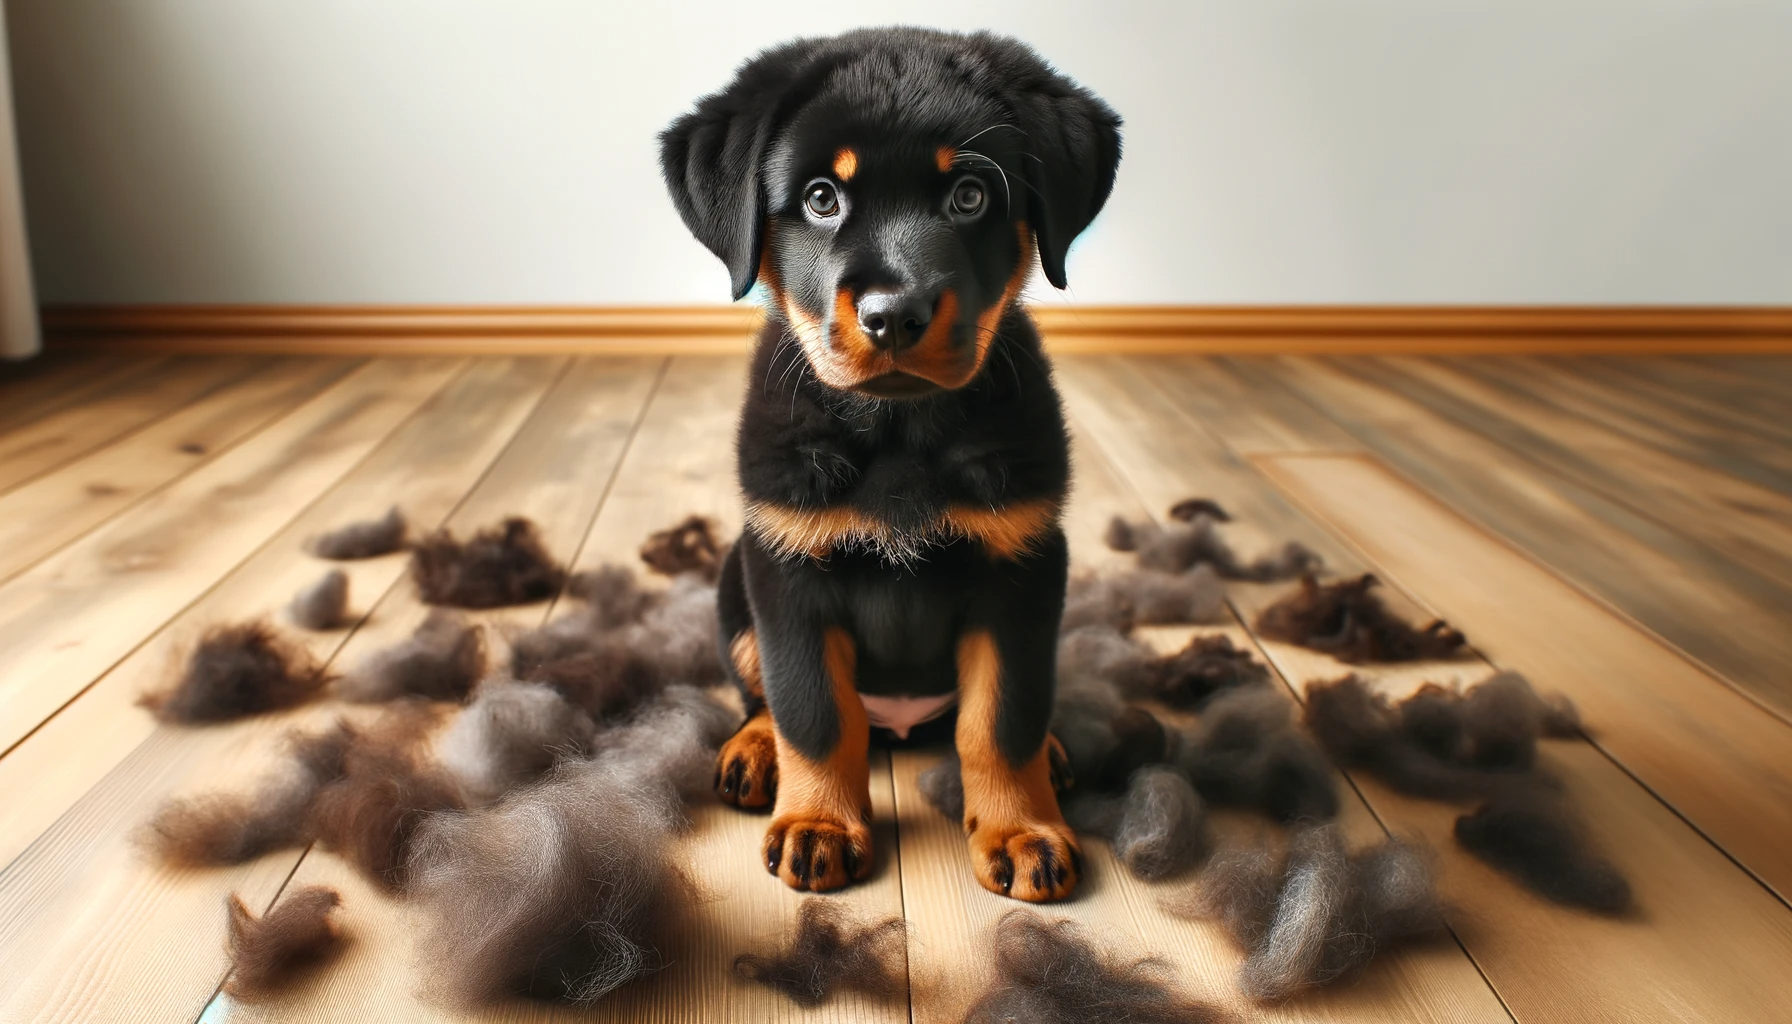 A Rottweiler Lab Mix Puppy surrounded by tufts of fur, indicating a shedding season